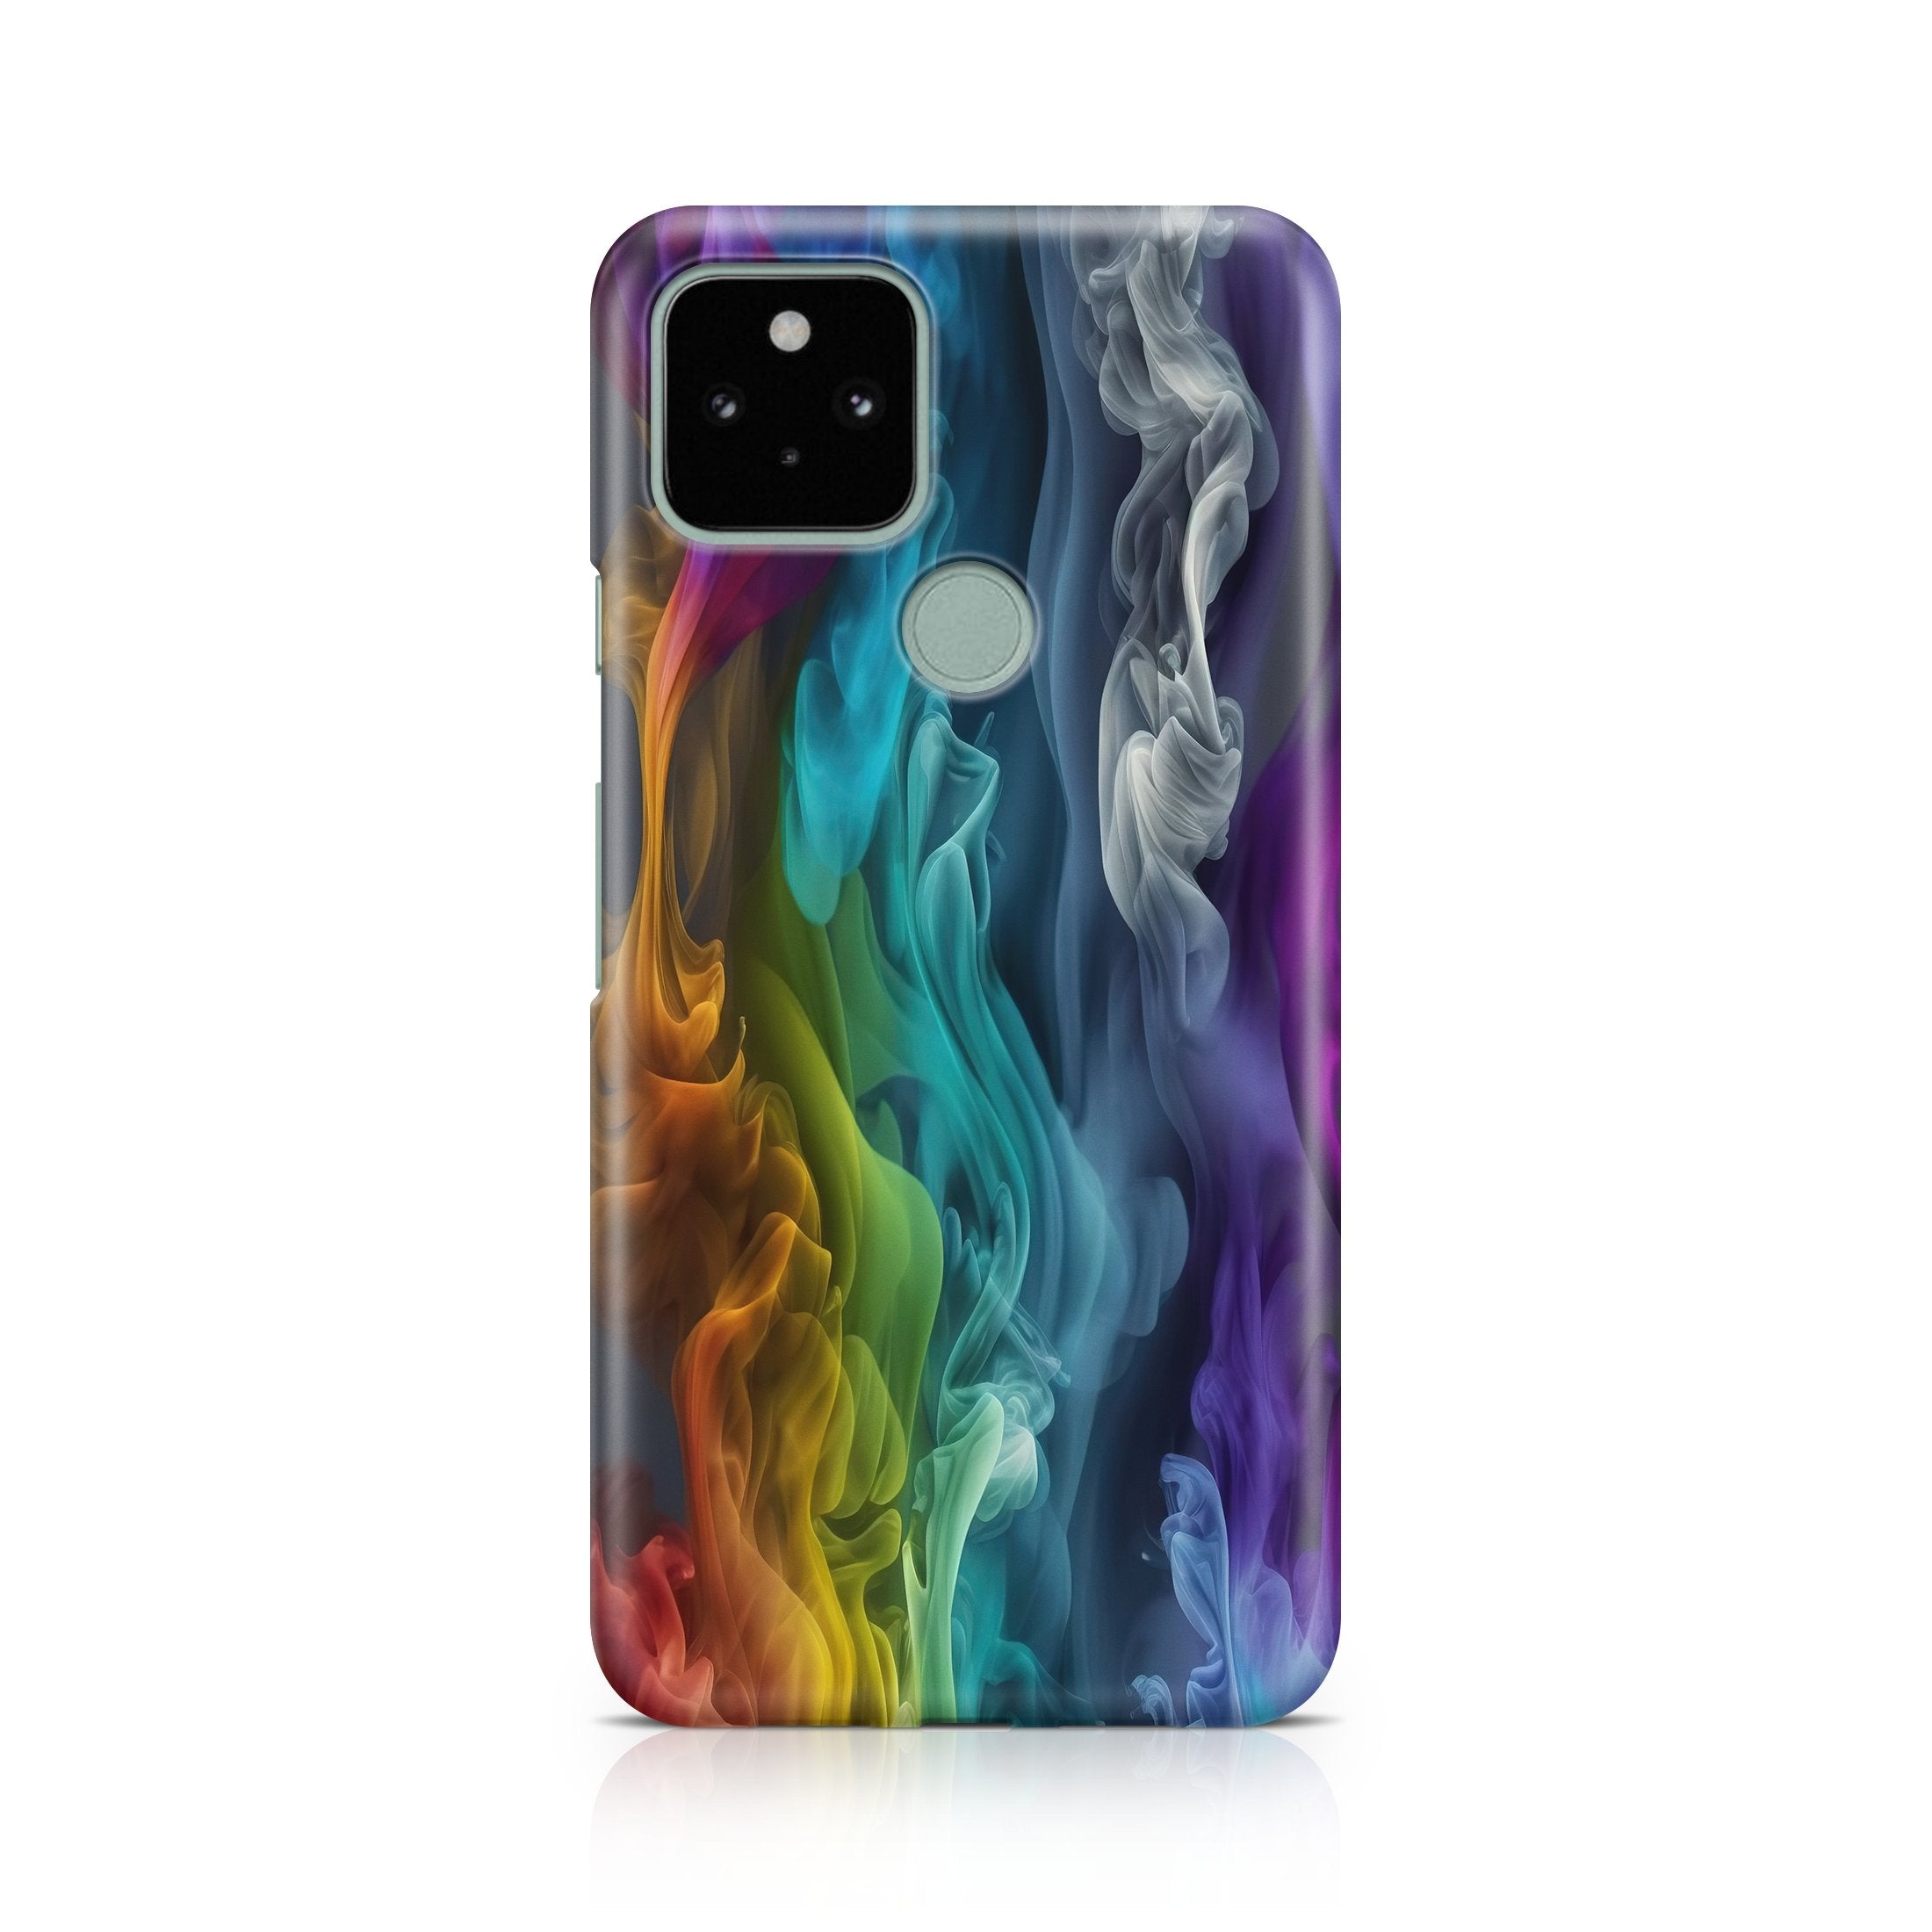 Stream Smoke - Google phone case designs by CaseSwagger